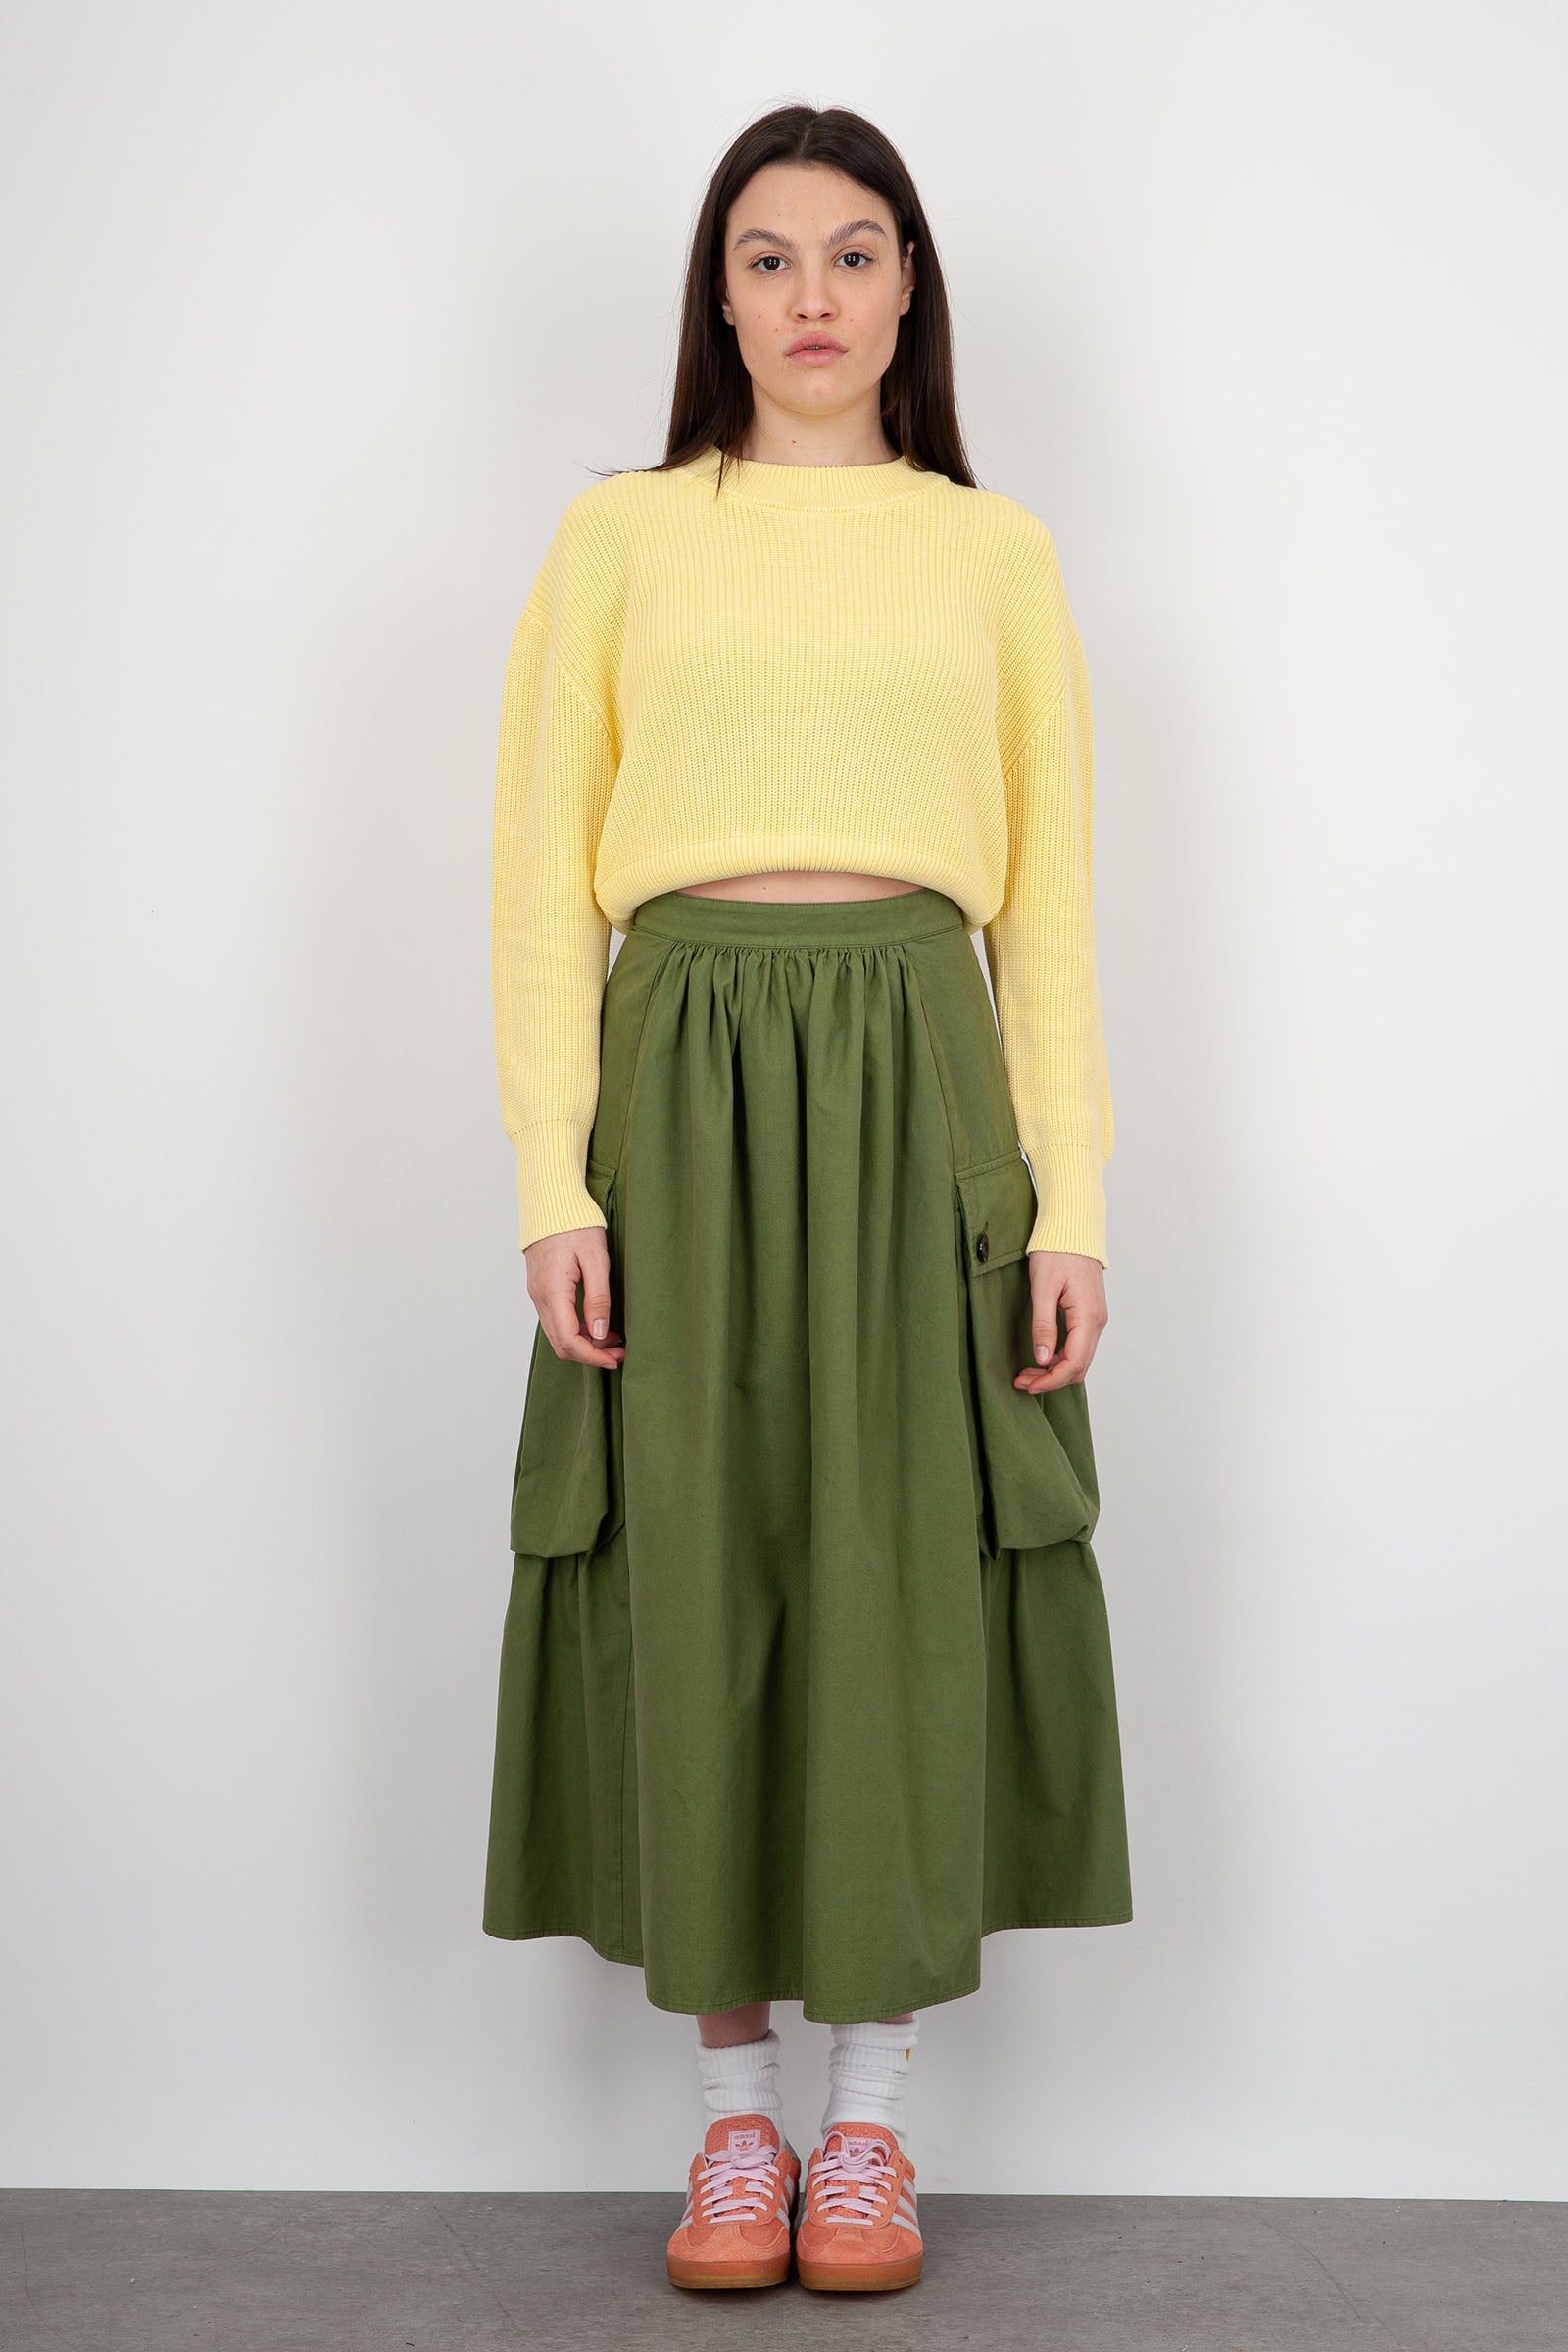 Department Five Selma Skirt in Military Green Cotton - 6